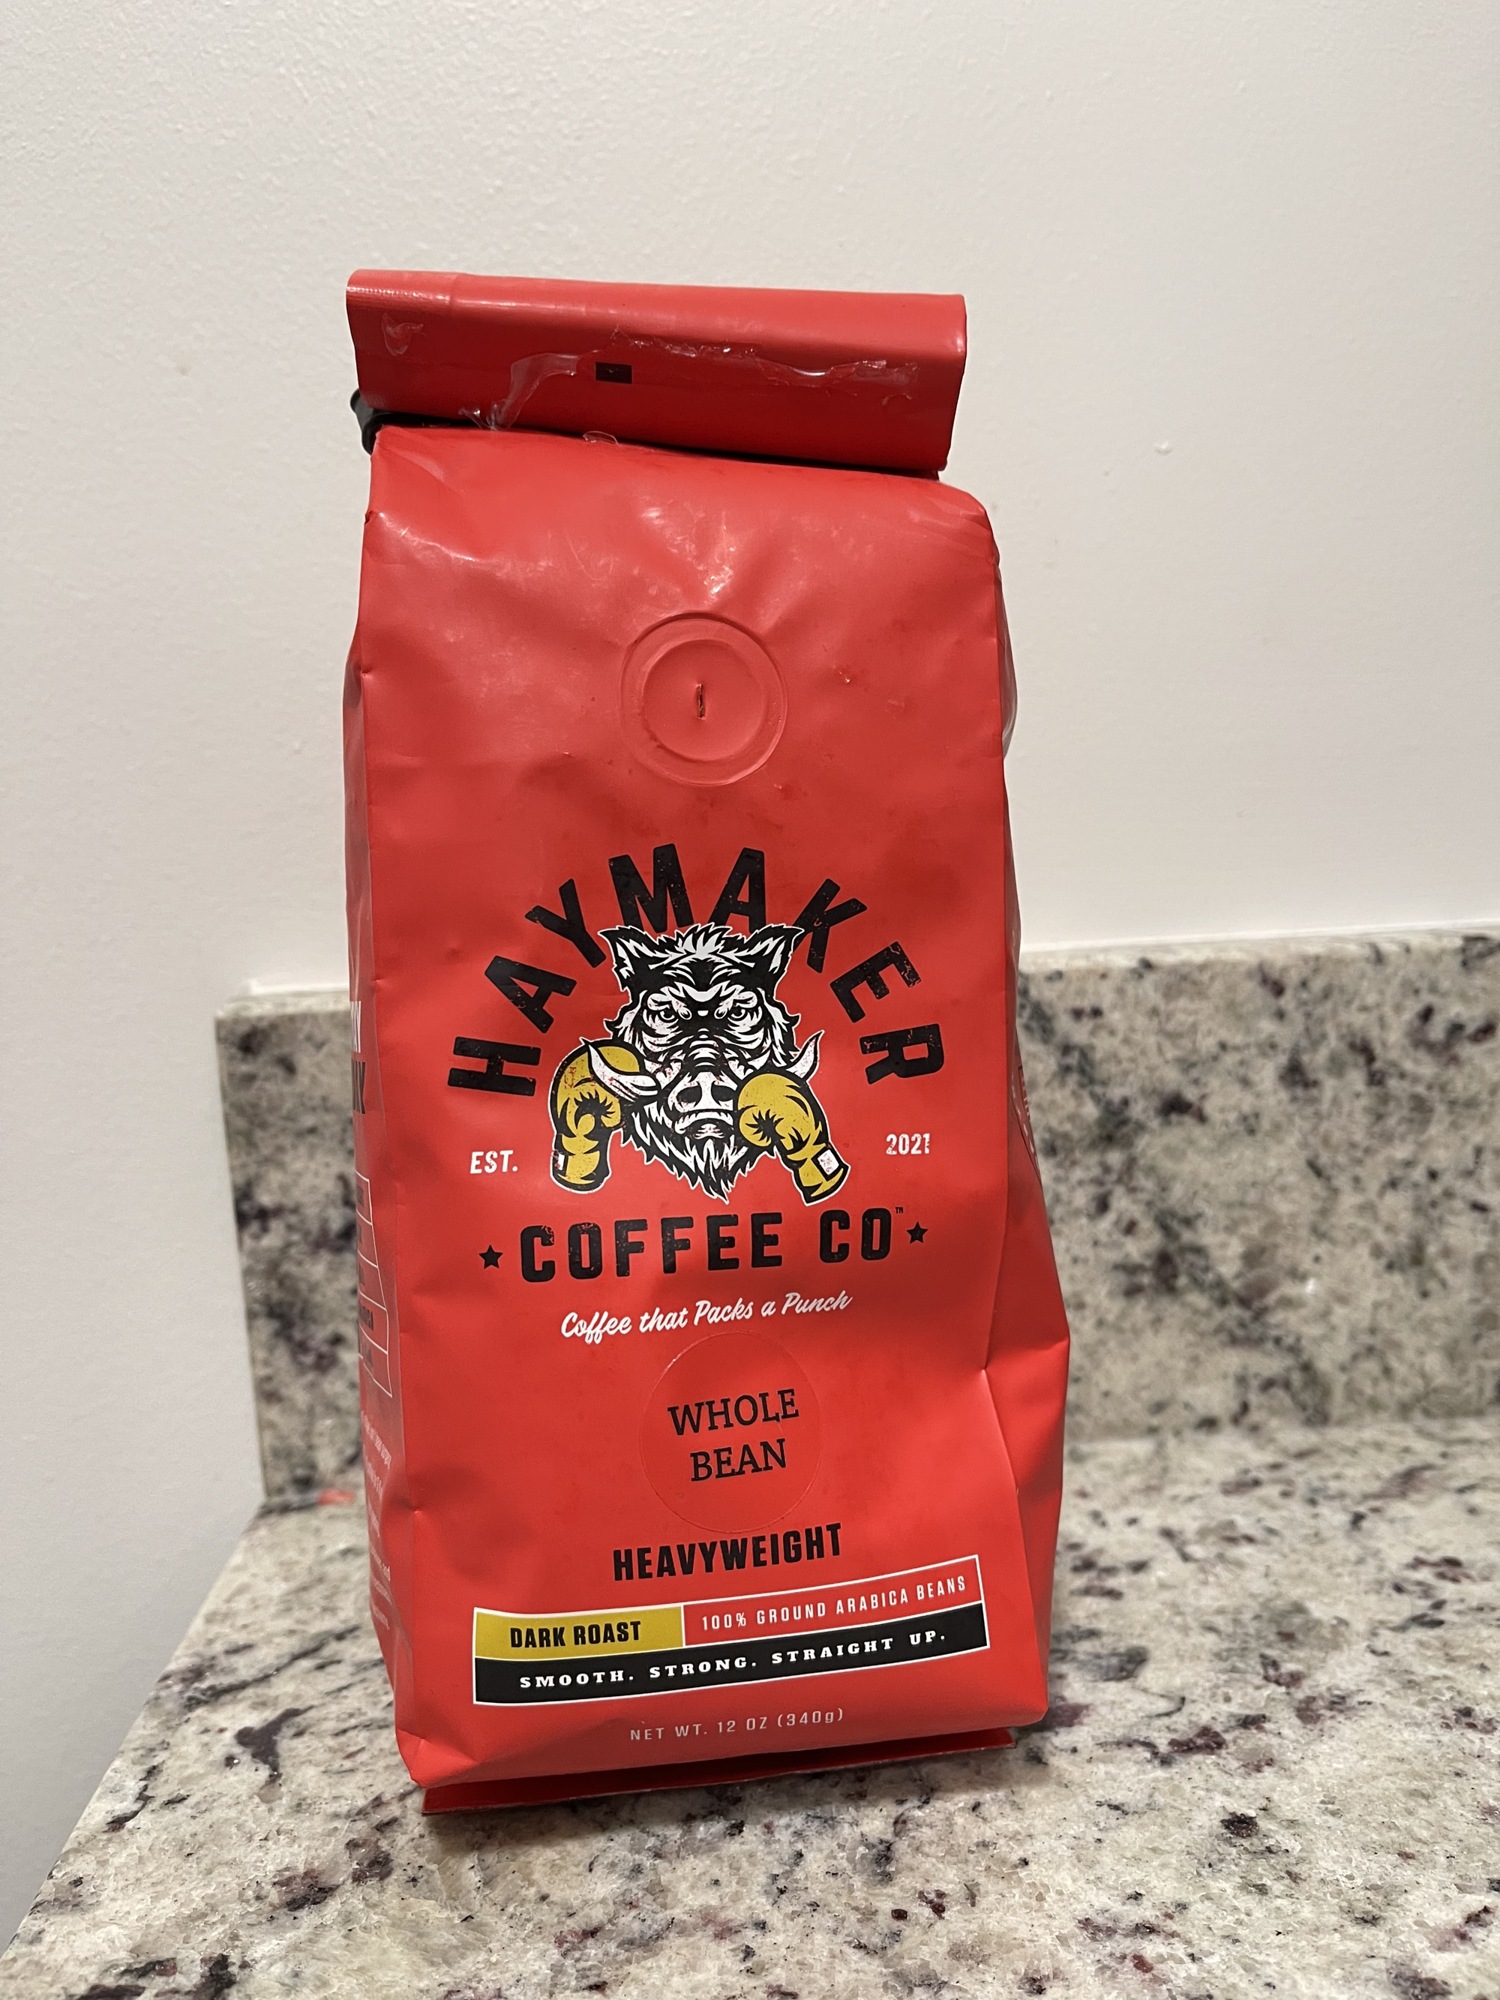 Concealment Express is expanding its brand to coffee.